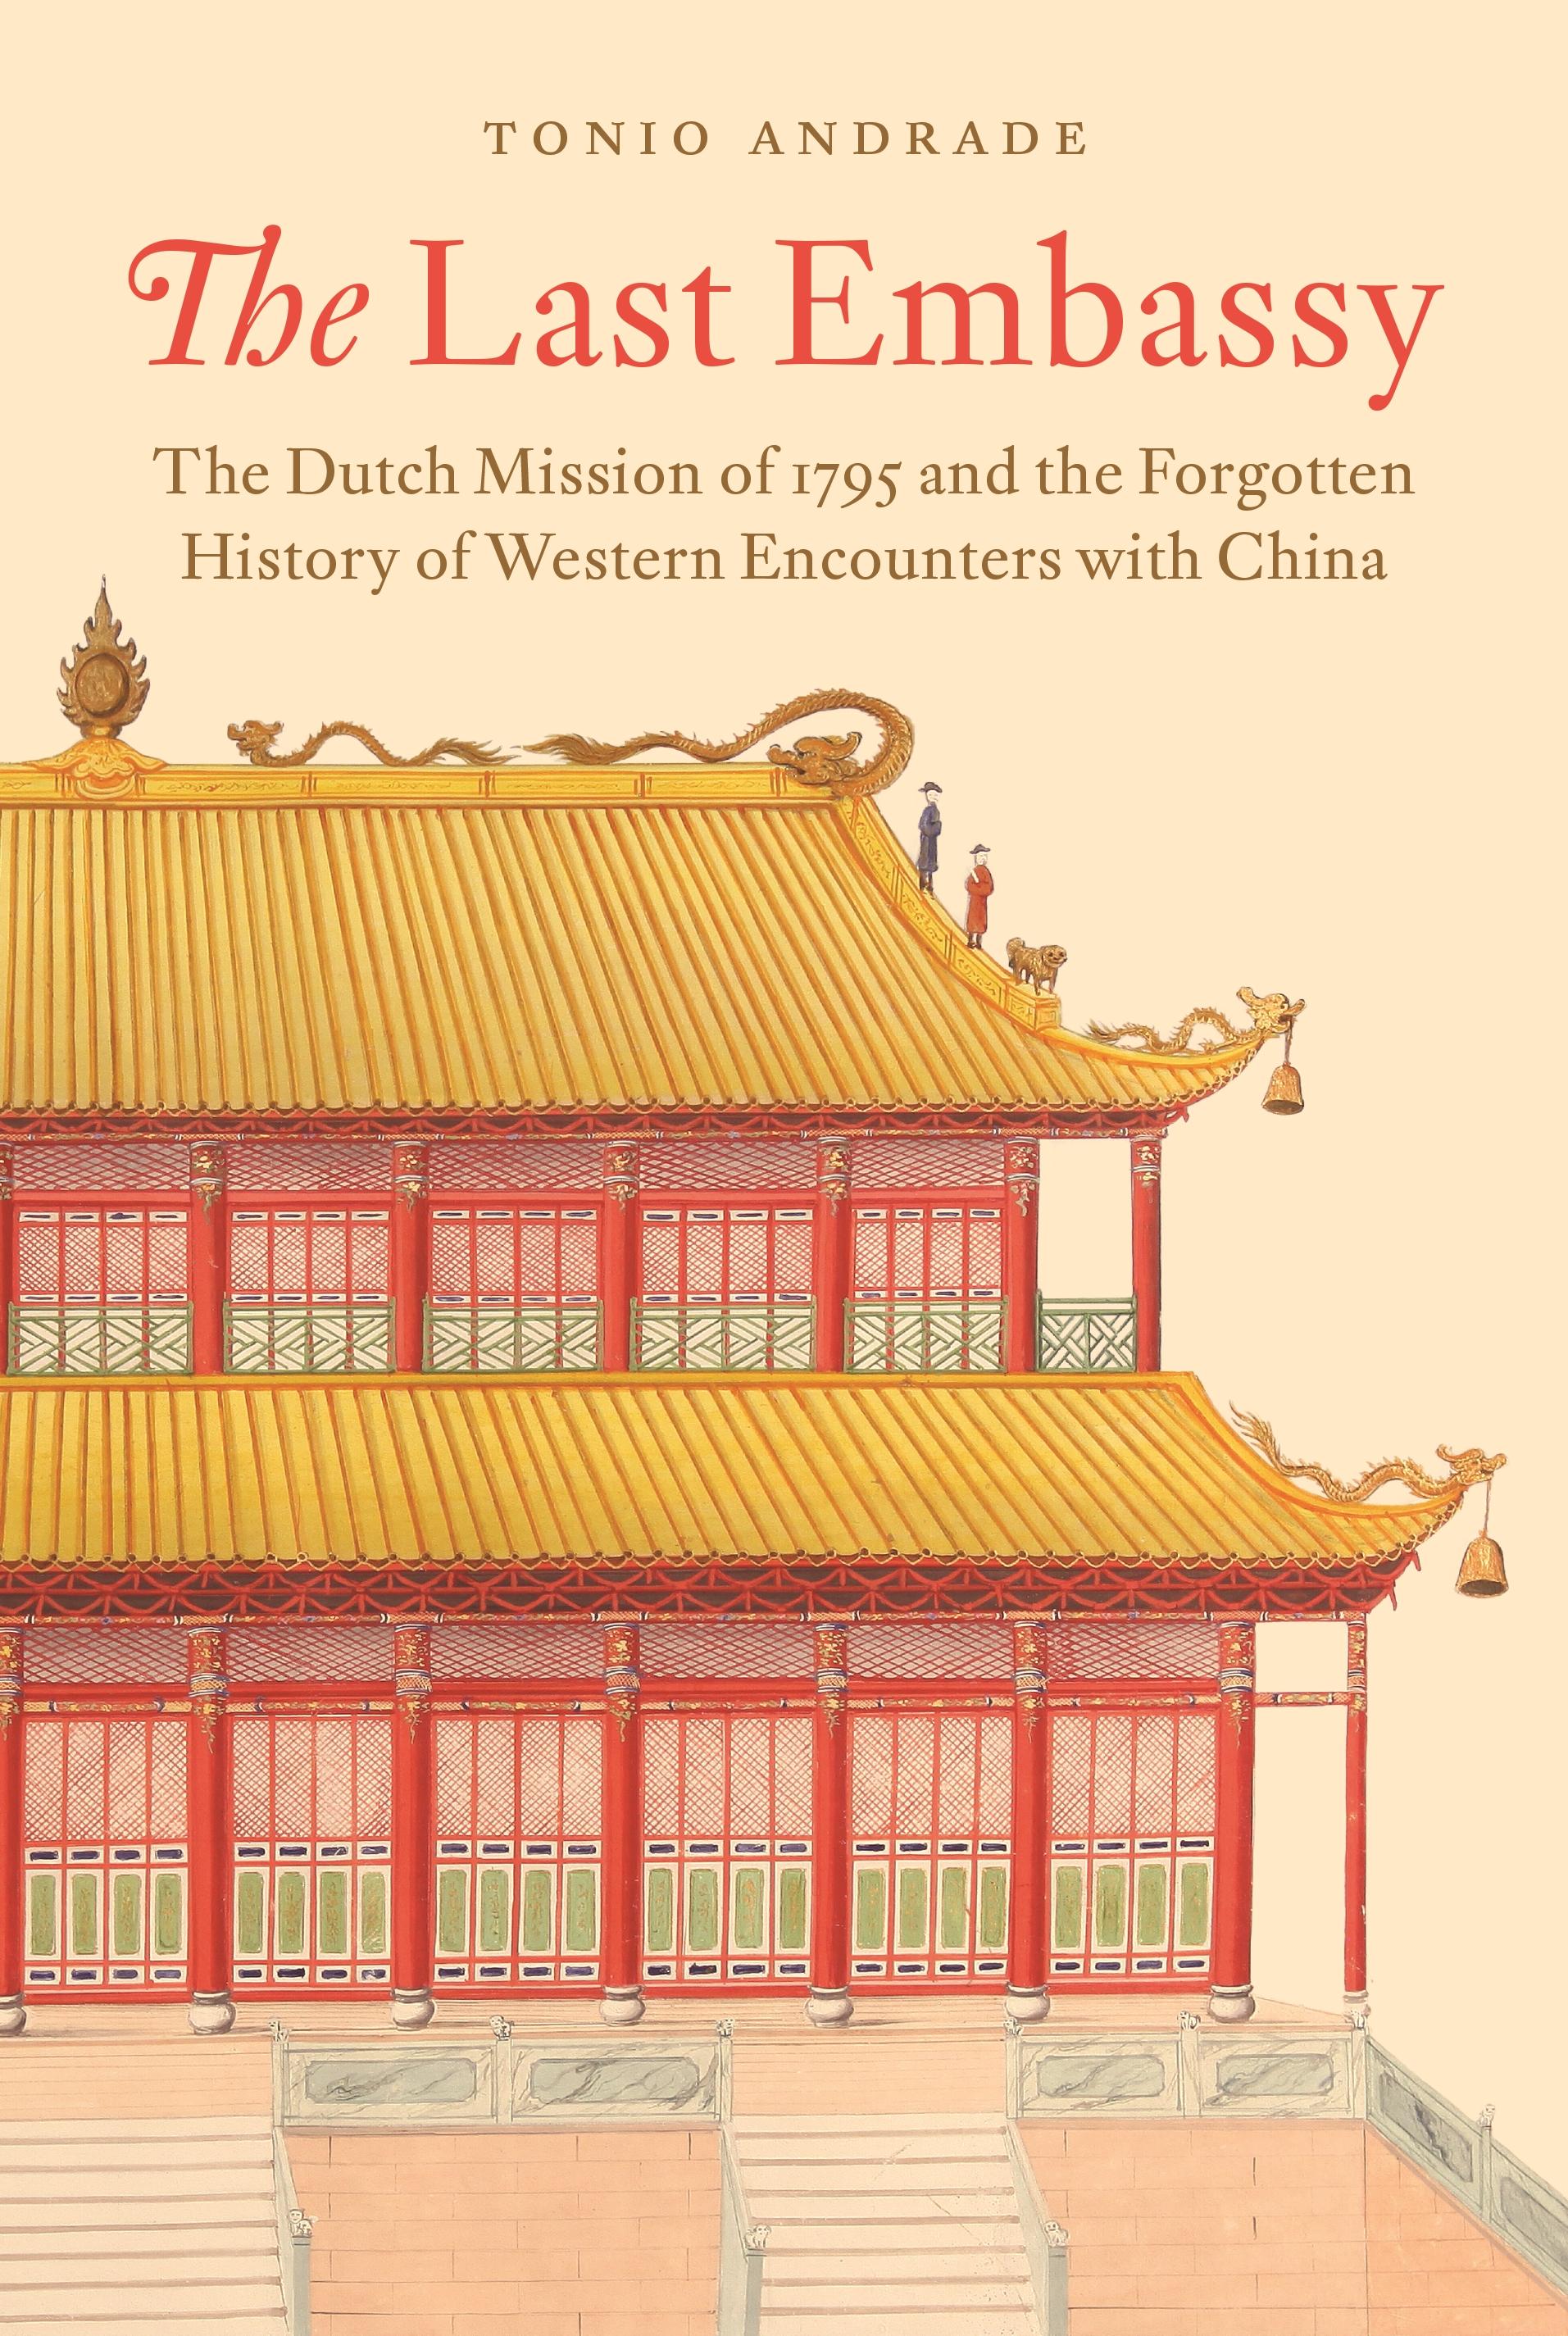 The Last Embassy  The Dutch Mission of 1795 and the Forgotten History of Western Encounters with China  Tonio Andrade  Buch  Englisch  2021  Princeton University Press  EAN 9780691177113 - Andrade, Tonio